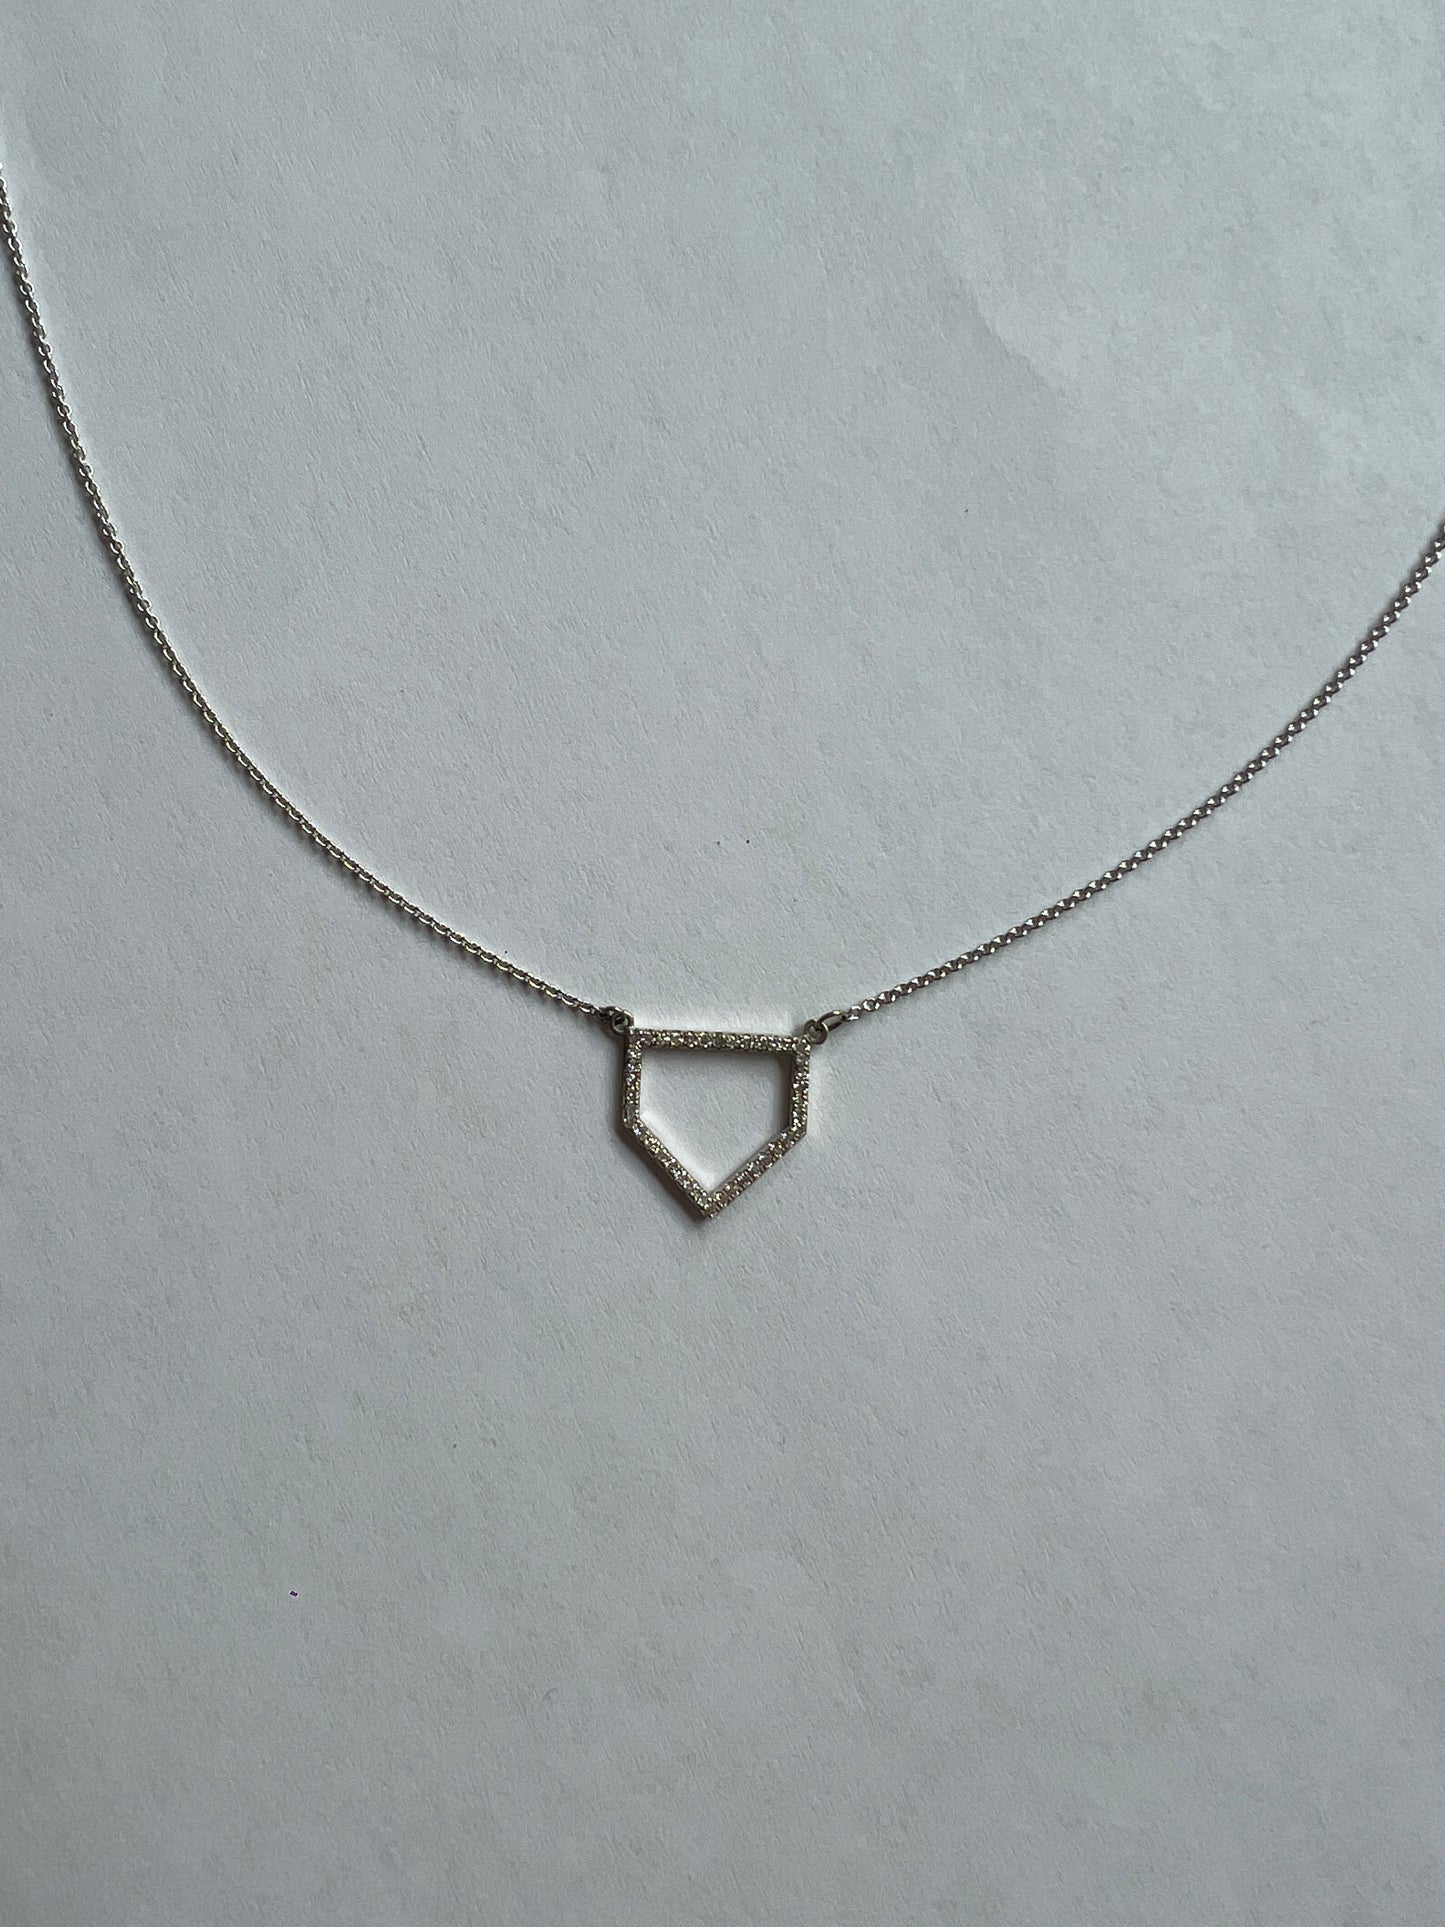 Home Plate 14k White Gold & Diamond Necklace